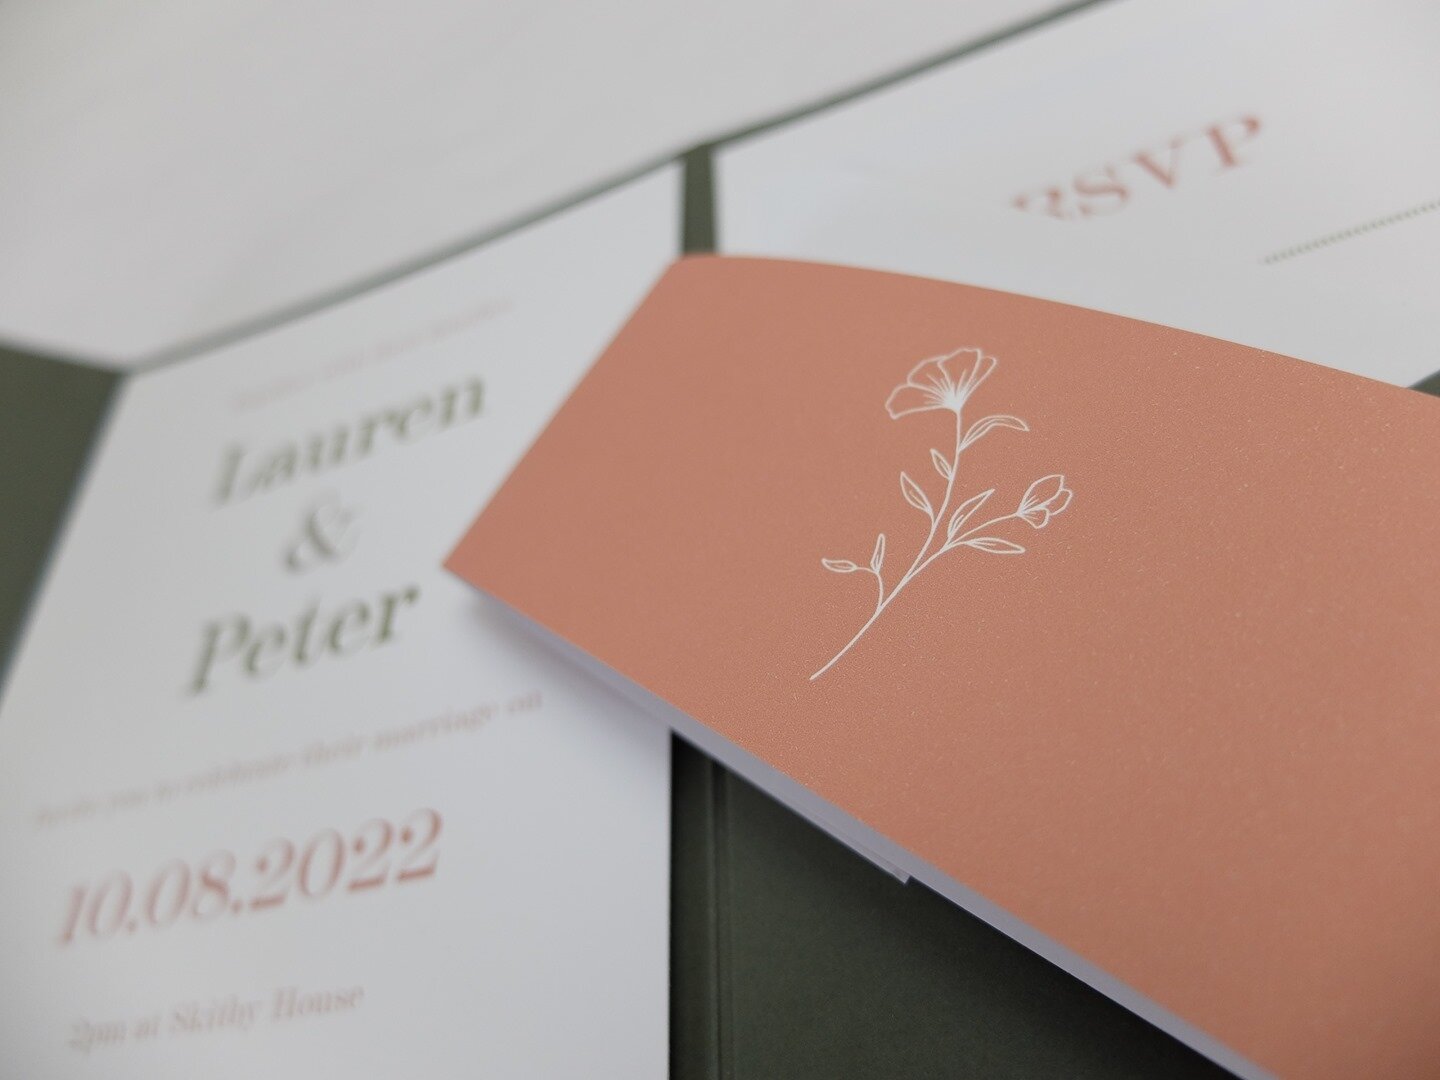 Our Apricot collection adapted to fit with a dark green pocketfold for an Autumn wedding 💒⁠
⁠
#weddinginvites #invitationinspo #weddinginvitations #invitationsuite #eucalyptuswedding #eucalyptus #bridetobe #groomtobe #enageedcouple #shesaidyes #2021